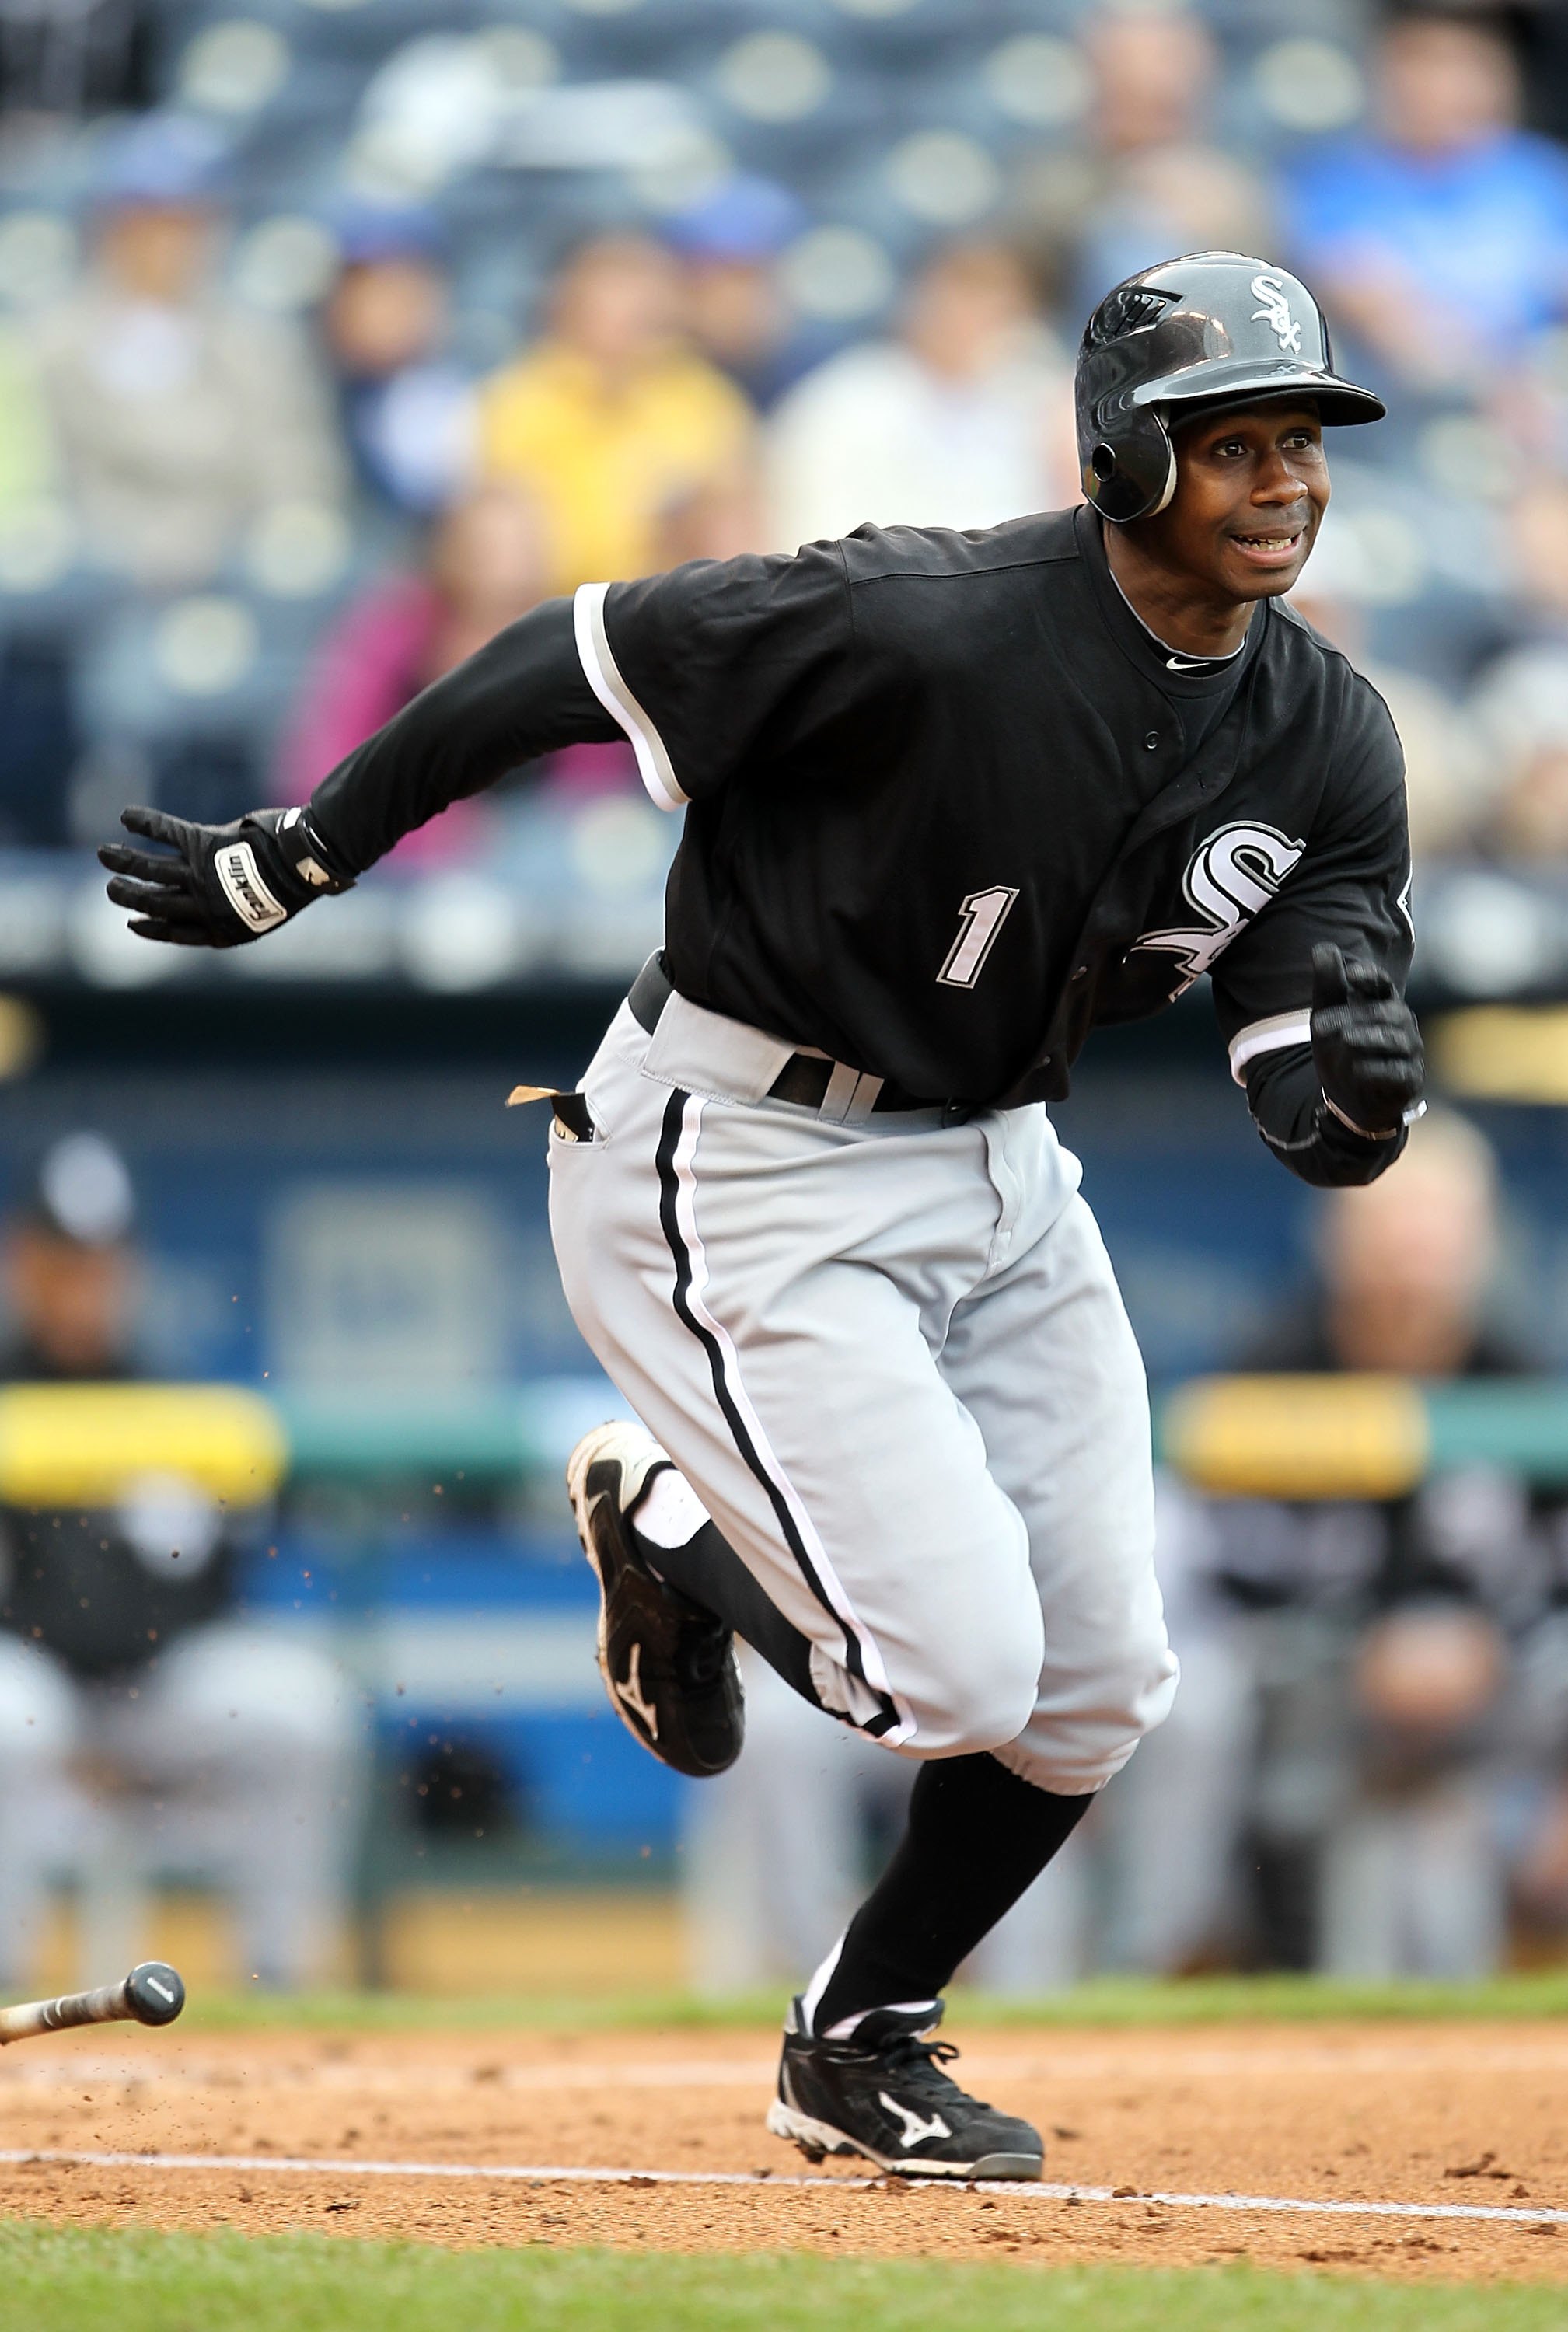 KANSAS CITY, MO - MAY 16:  Juan Pierre #1 of the Chicago White Sox runs toward first after a hit during the game against the Kansas City Royals on May 16, 2010 at Kauffman Stadium in Kansas City, Missouri.  (Photo by Jamie Squire/Getty Images)